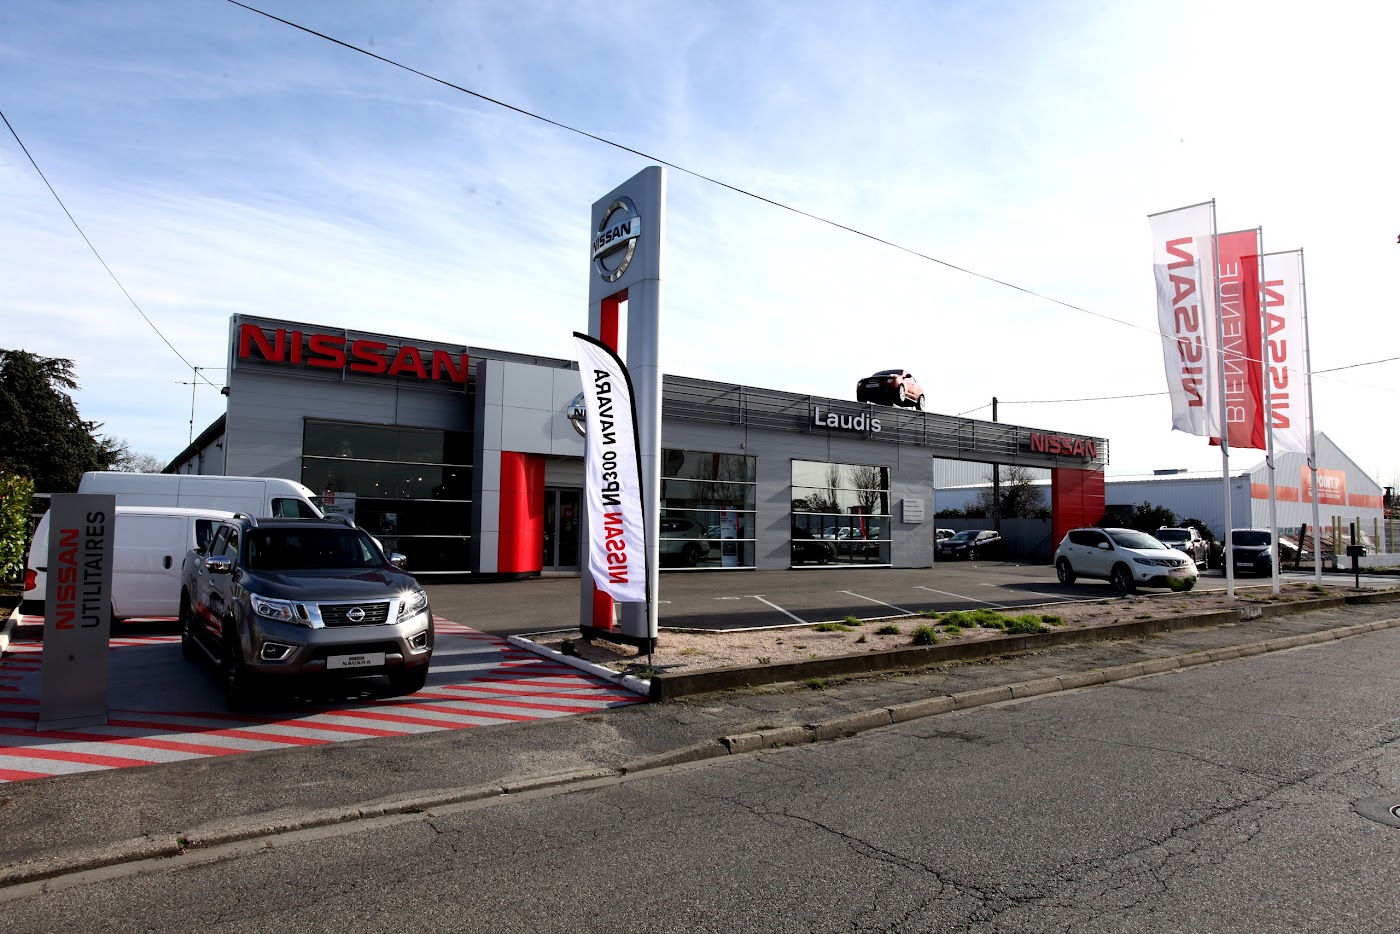 NISSAN TOULOUSE MURET - GROUPE PEYROT